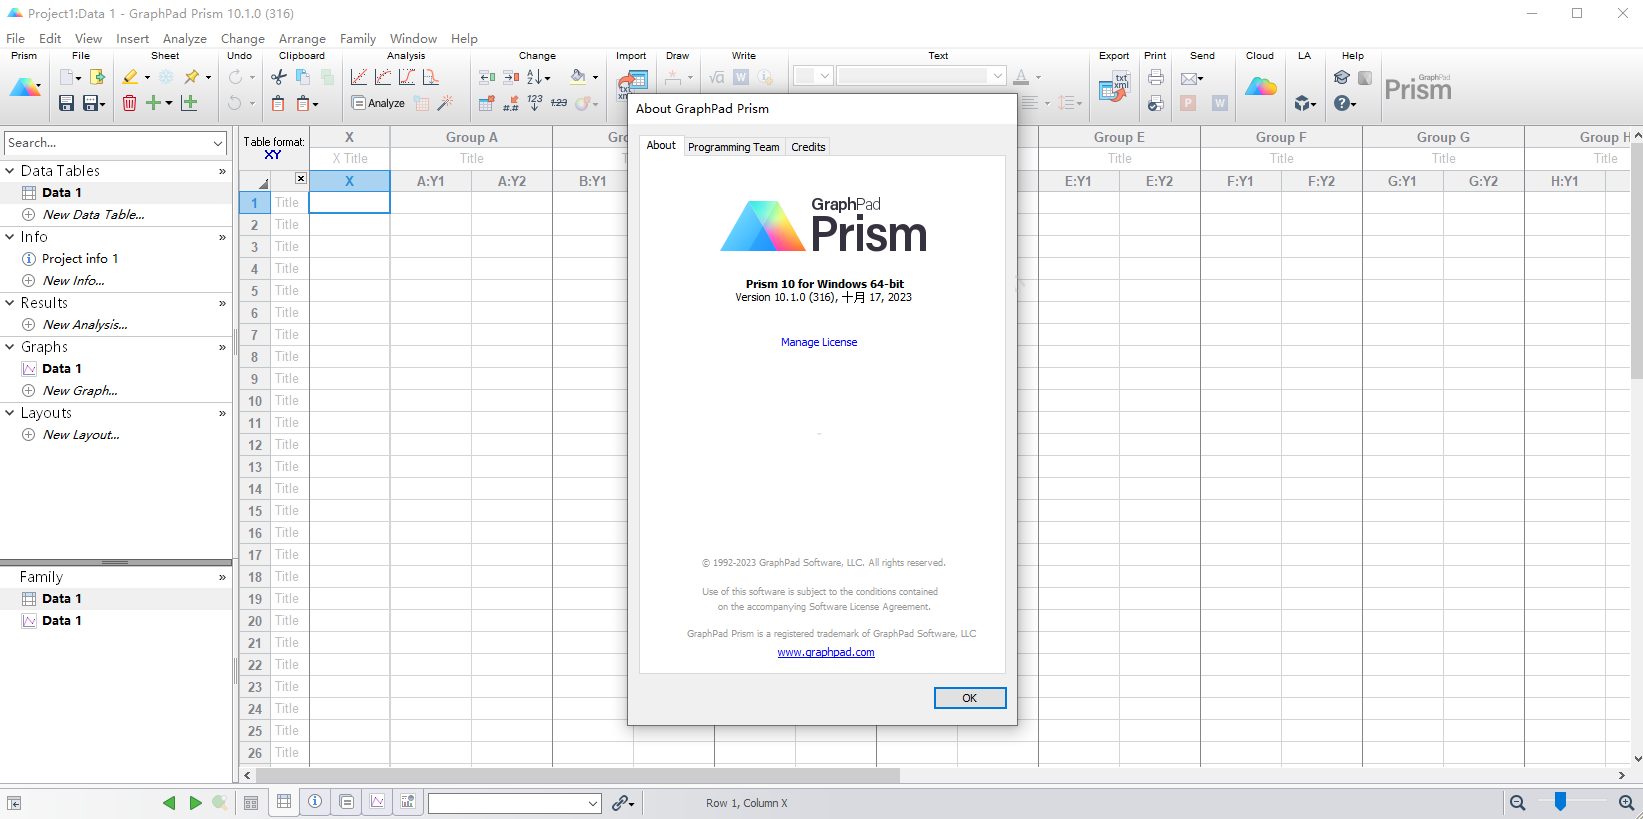 Working with GraphPad Prism 10.1.0.316 full license